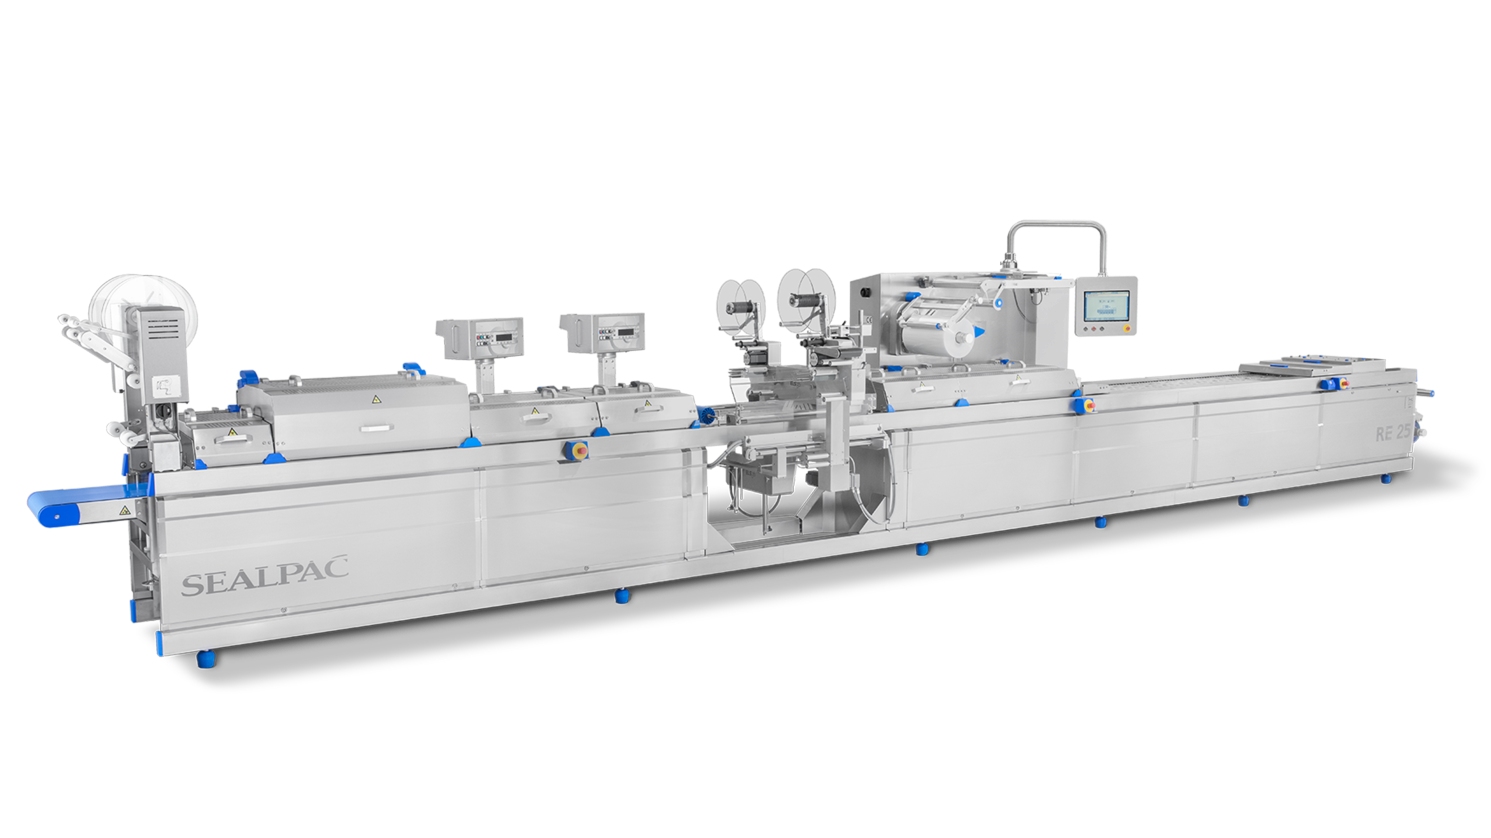 The SEALPAC RE25 thermoformer can work with vacuum, MAP and shrink solutions. All packaging solutions can be equipped with Easy-opening such as EPP (Easy Peel Point) and reclosable solutions.